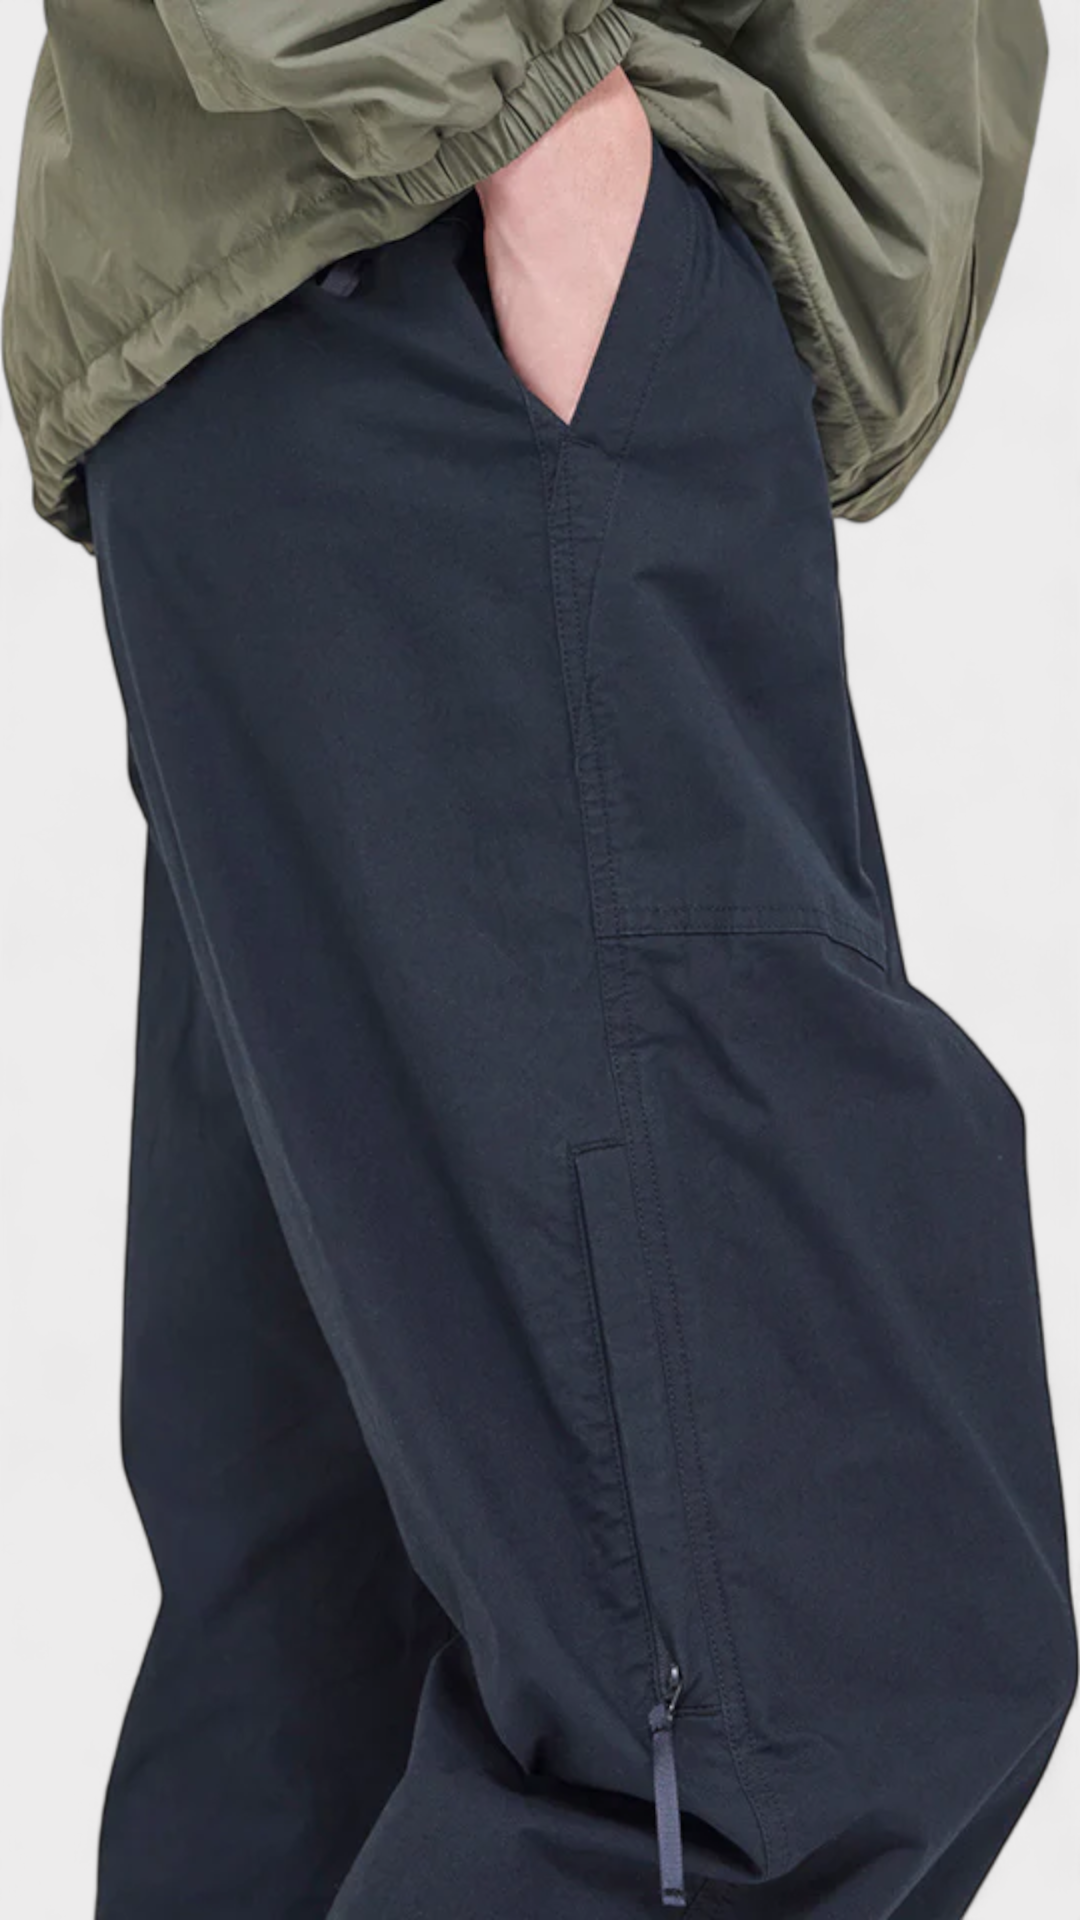 Weather Fatigue Pant